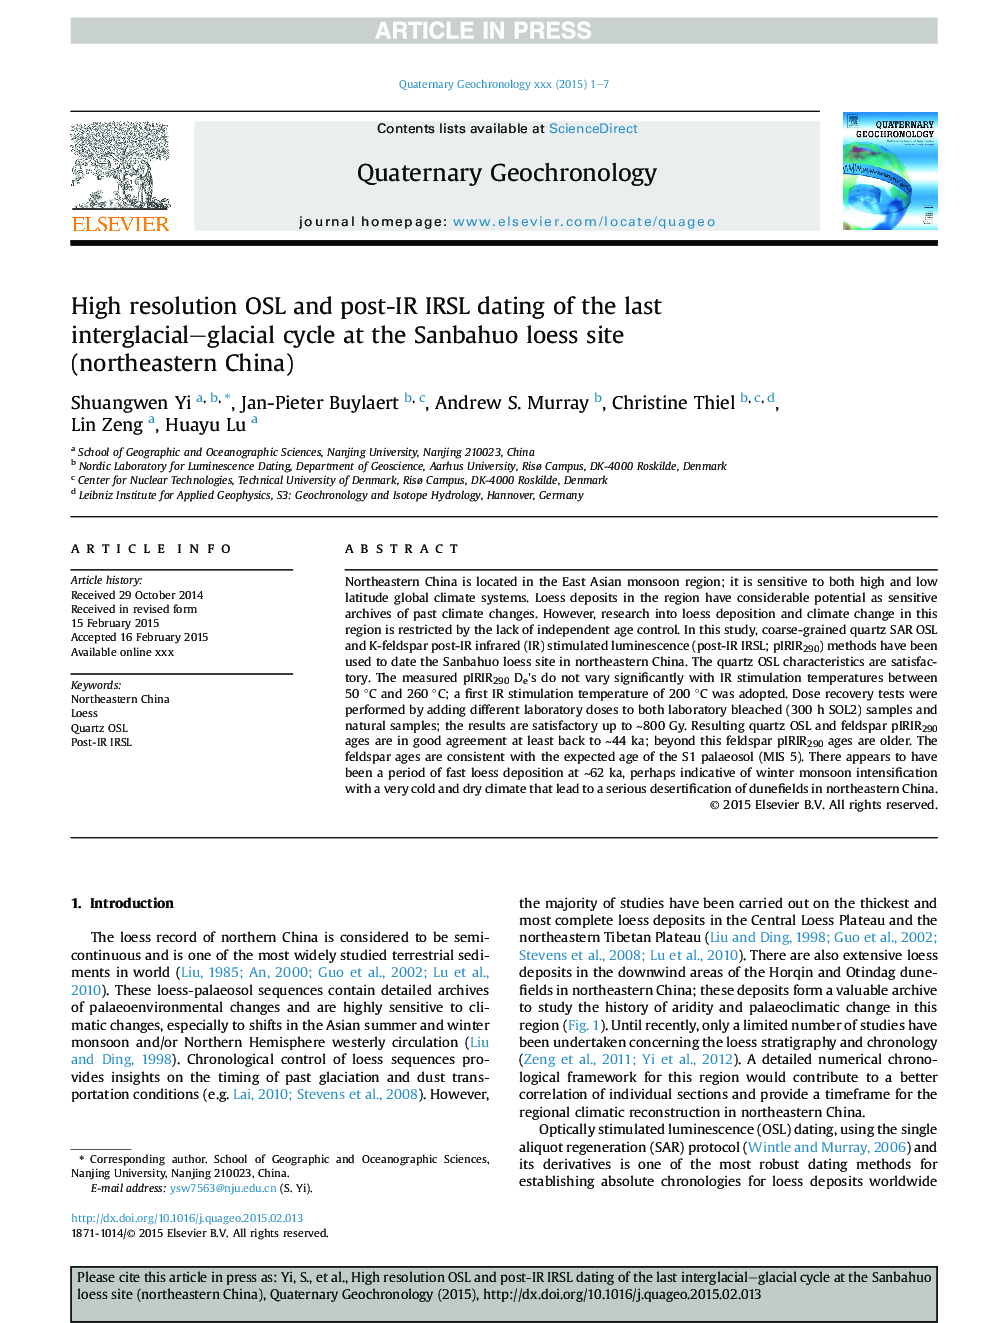 High resolution OSL and post-IR IRSL dating of the last interglacial-glacial cycle at the Sanbahuo loess site (northeastern China)